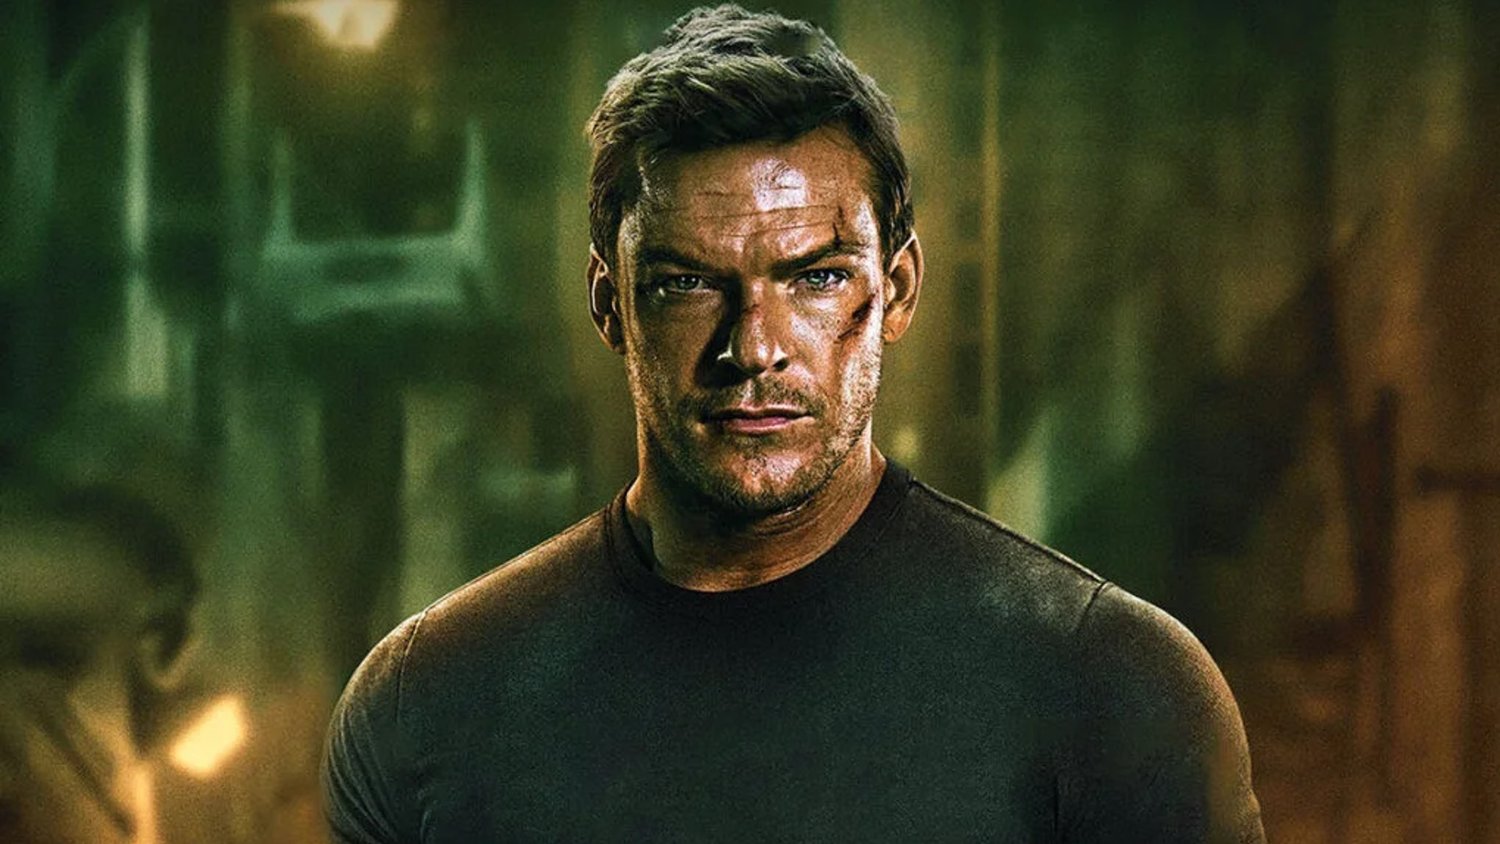 REACHER Series Actor Alan Ritchson Shares The Jack Reacher Story He Wants To Adapt Most